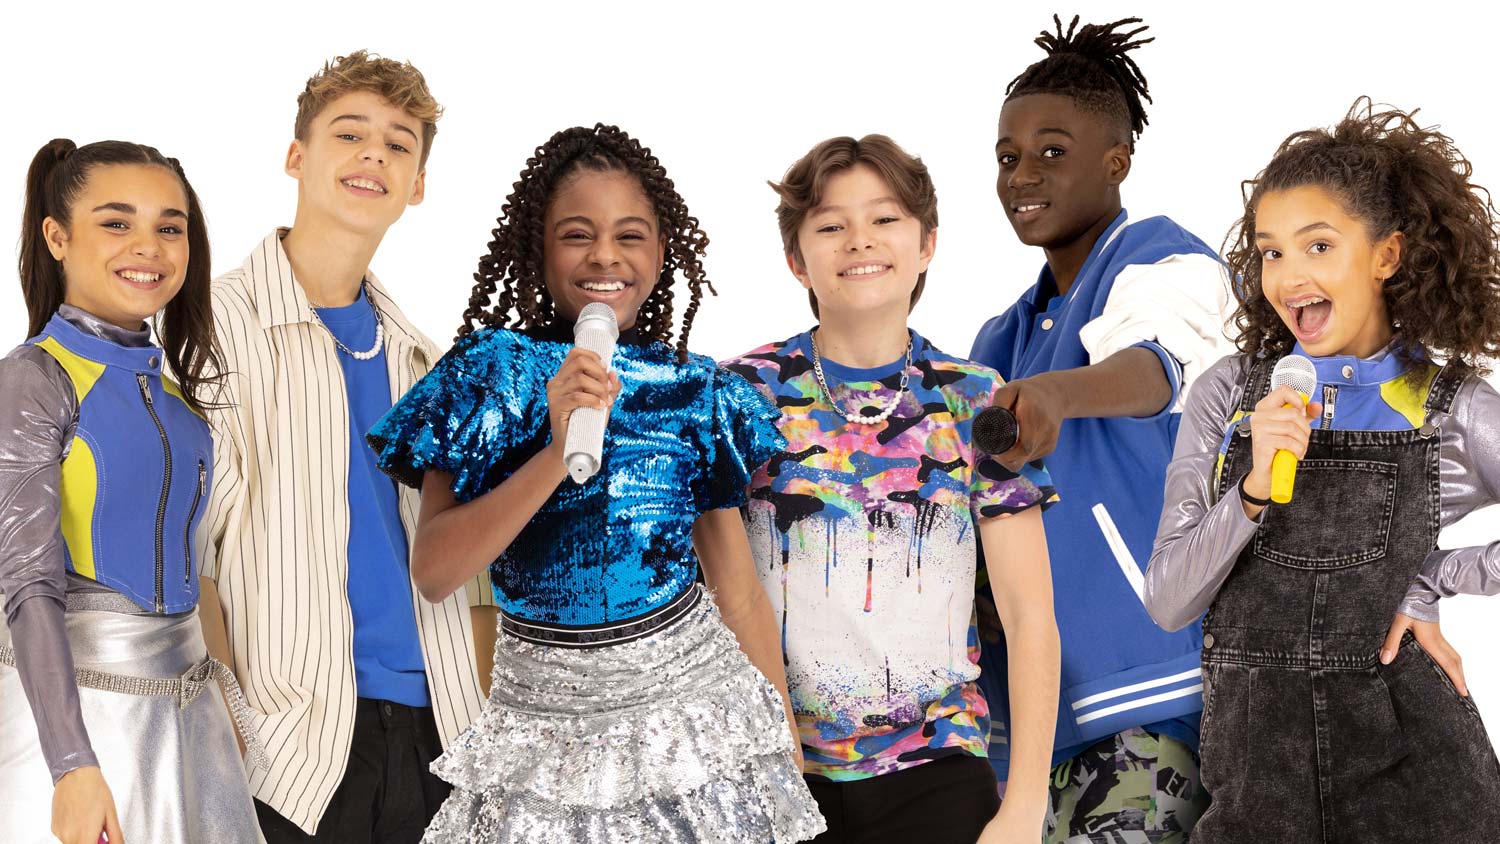 Kidz Bop and Concord Music Group